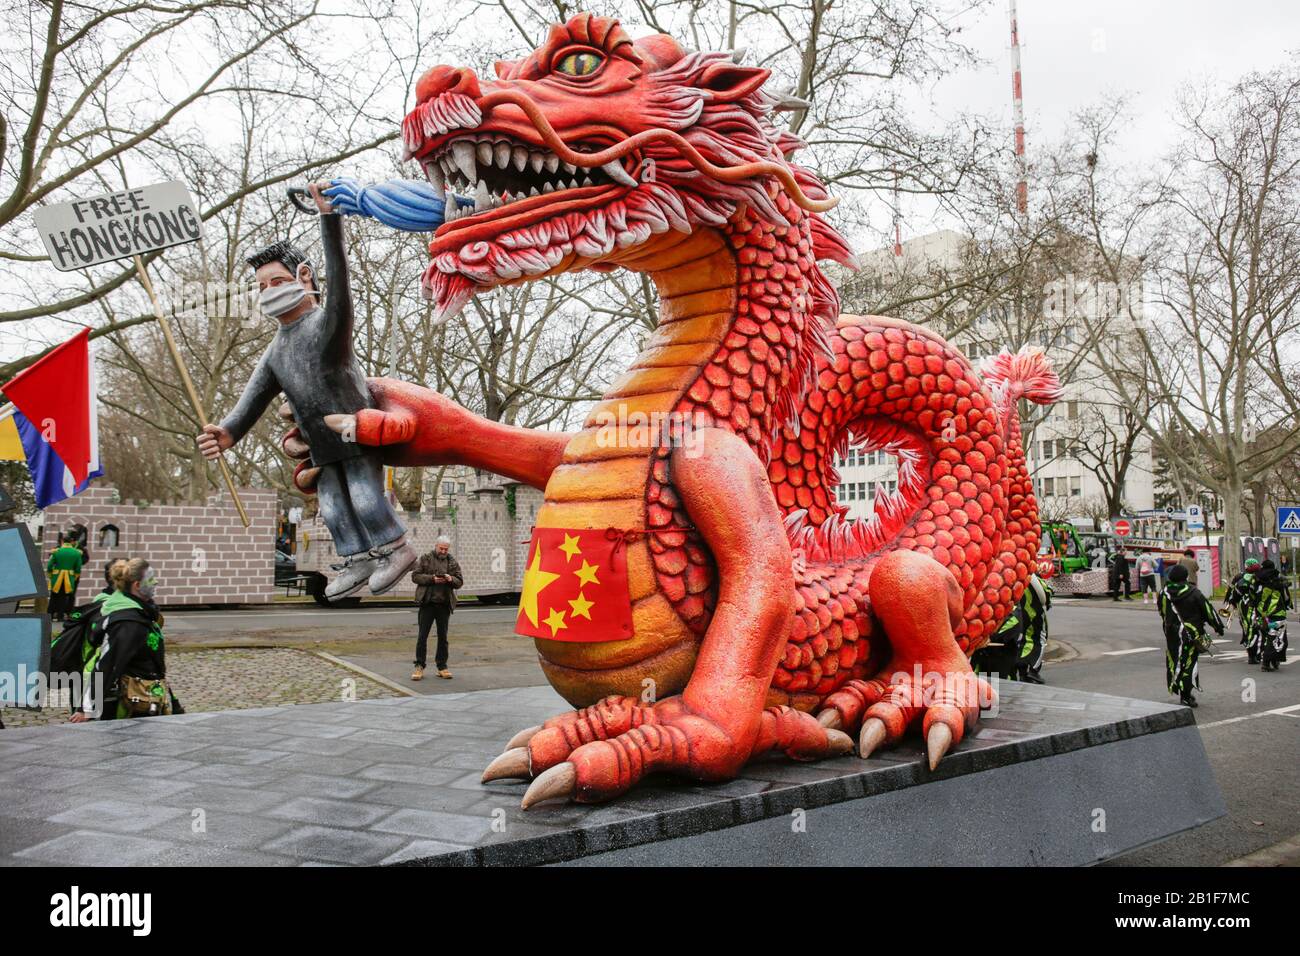 A protester from Hong Kong in the paw of a large red dragon, representing China, is depicted on a float in the Mainz Rose Monday parade. Around half a million people lined the streets of Mainz for the traditional Rose Monday Carnival Parade. The 9 km long parade with over 9,000 participants is one of the three large Rose Monday Parades in Germany. (Photo by Michael Debets/Pacific Press/Sipa USA) Stock Photo